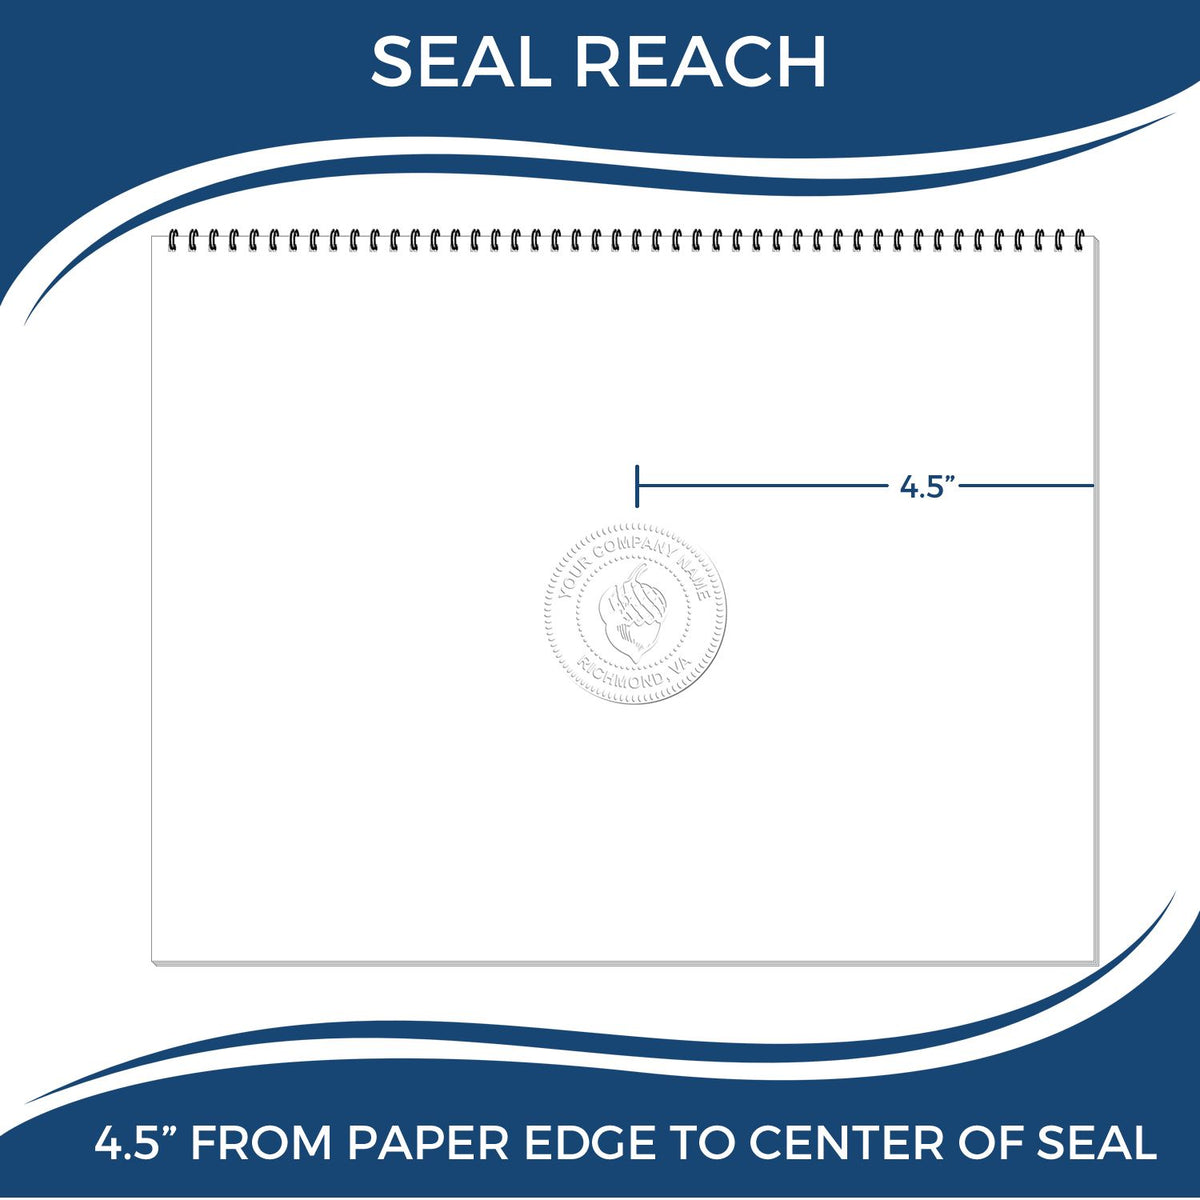 An infographic showing the seal reach which is represented by a ruler and a miniature seal image of the State of Oregon Extended Long Reach Geologist Seal